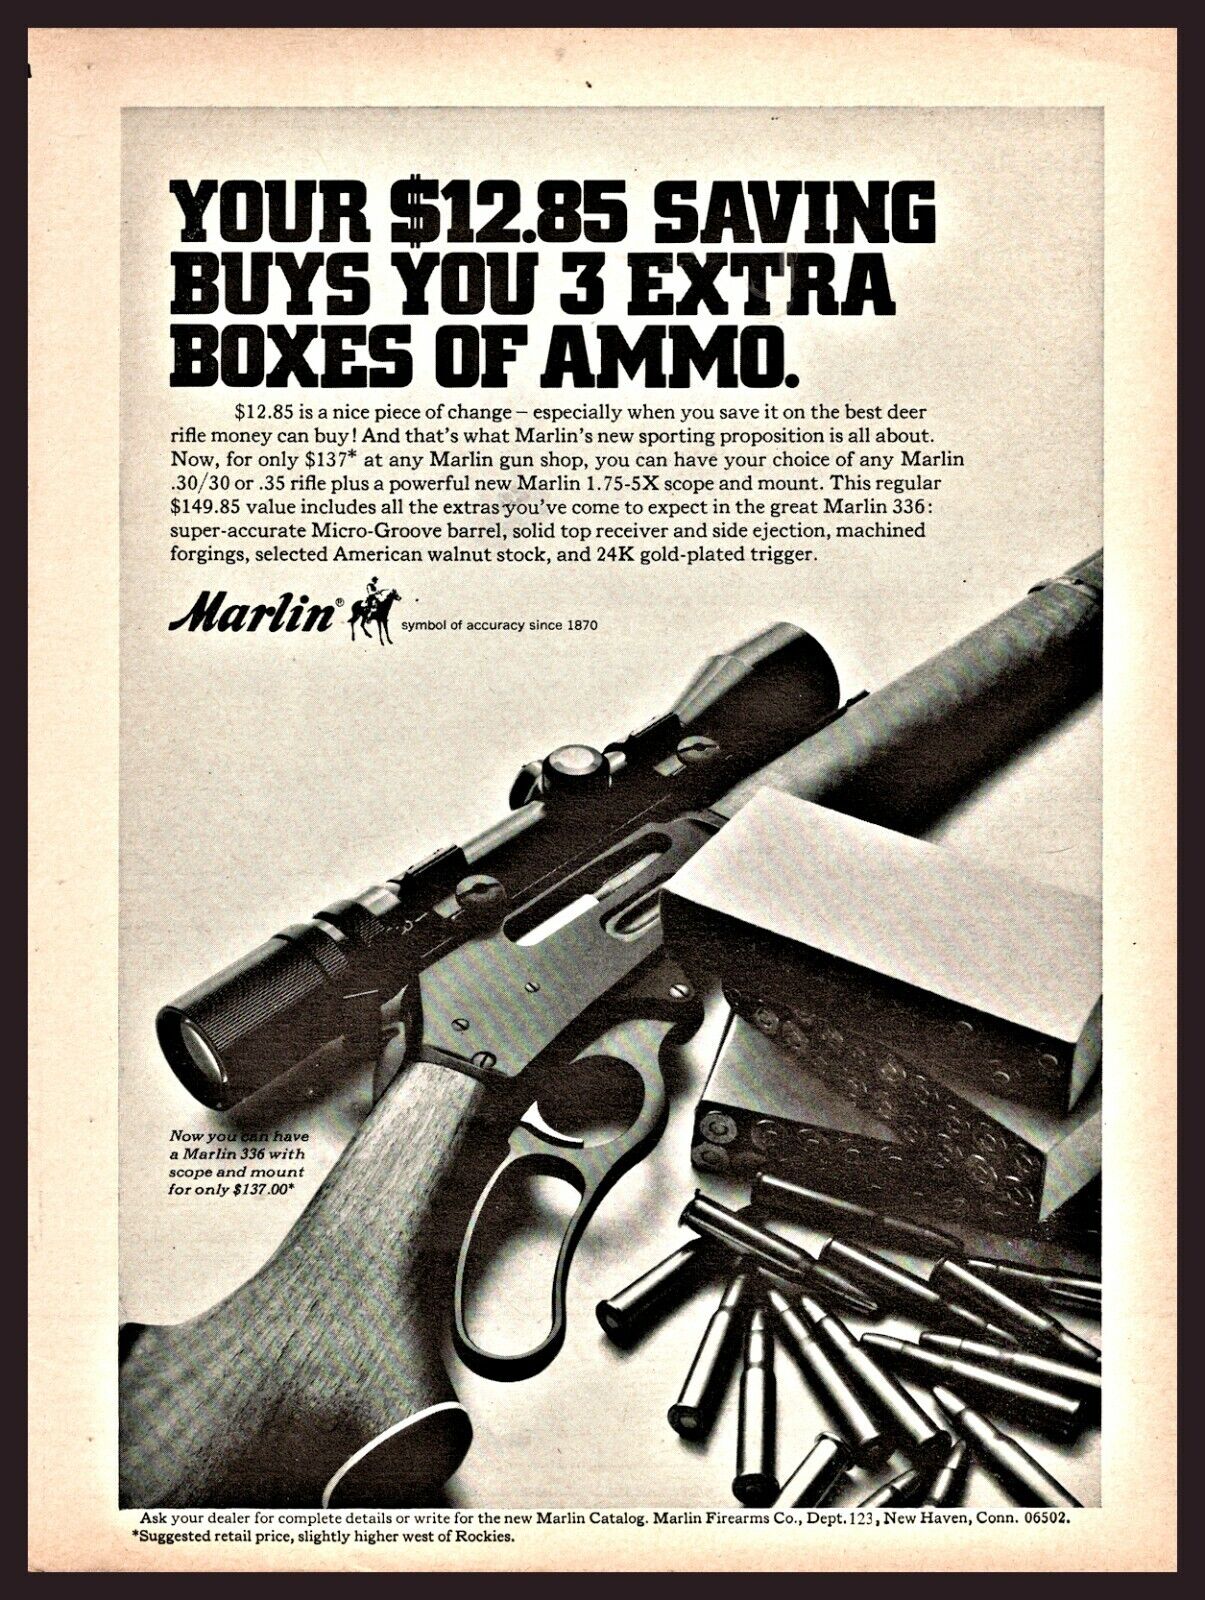 1969 MARLIN 336 Lever Action Rifle shown w/scope PRINT AD Old Gun Advertising